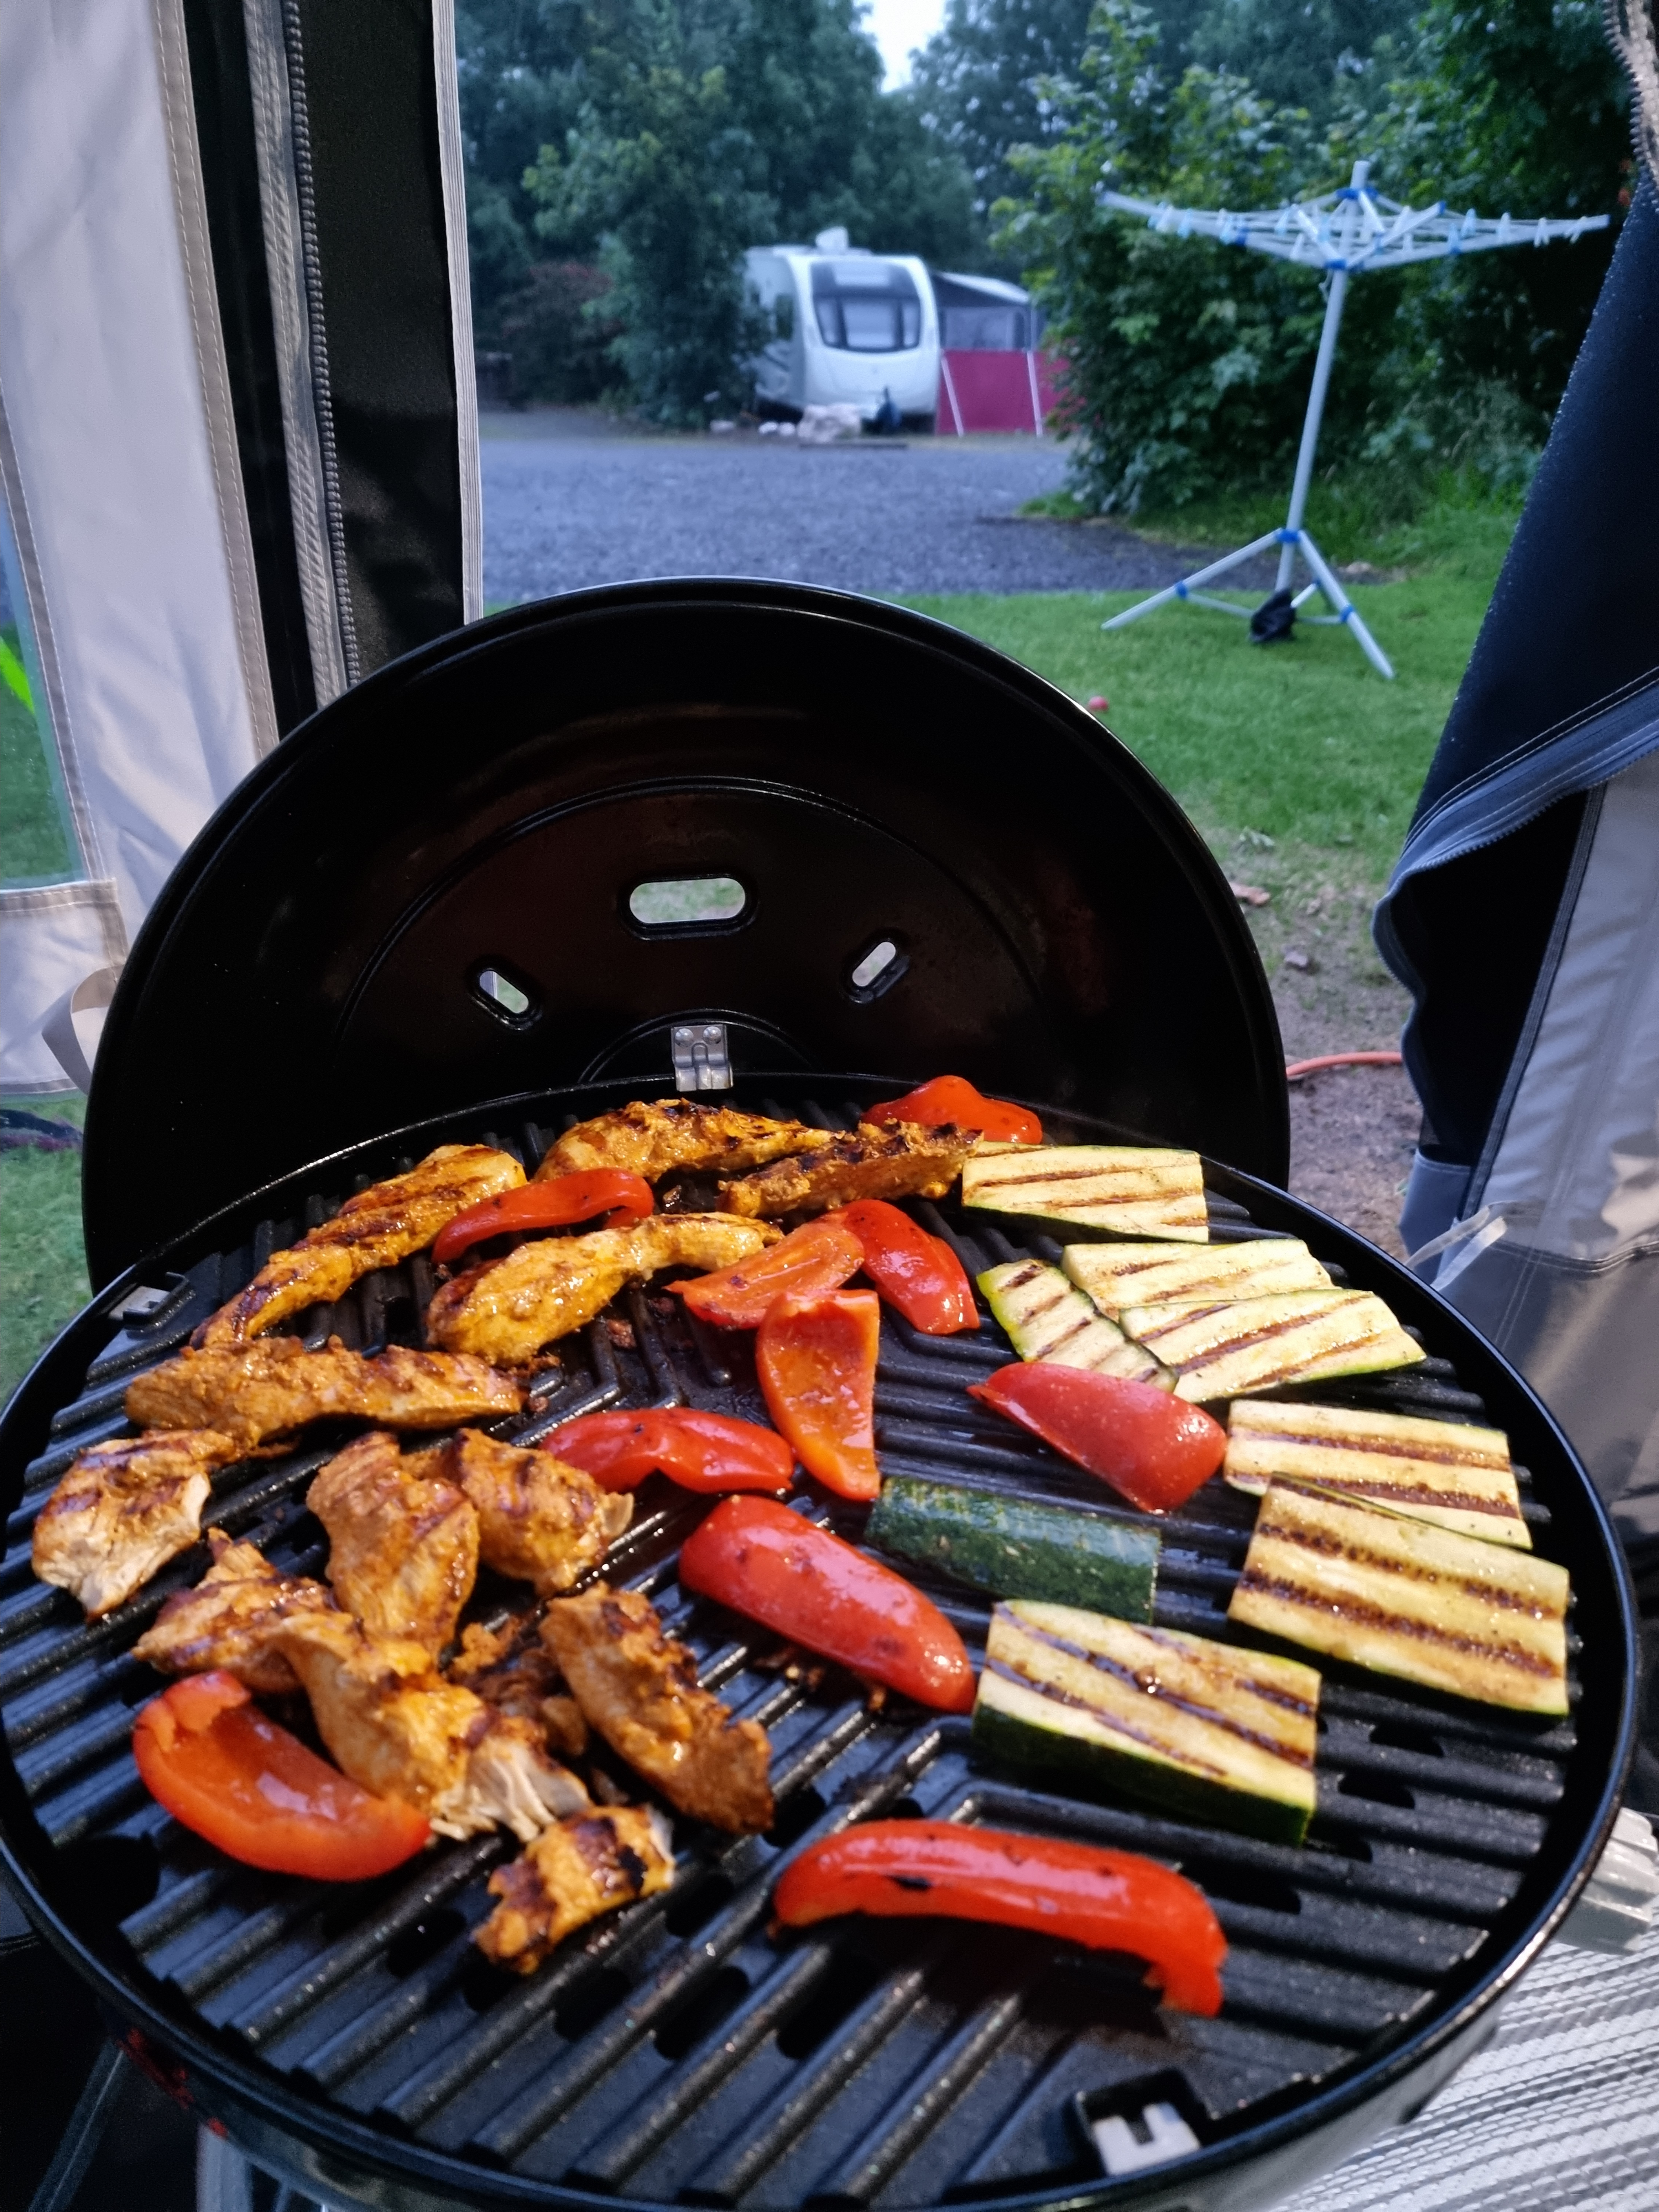 BBQ World 5 star review on 10th August 2021